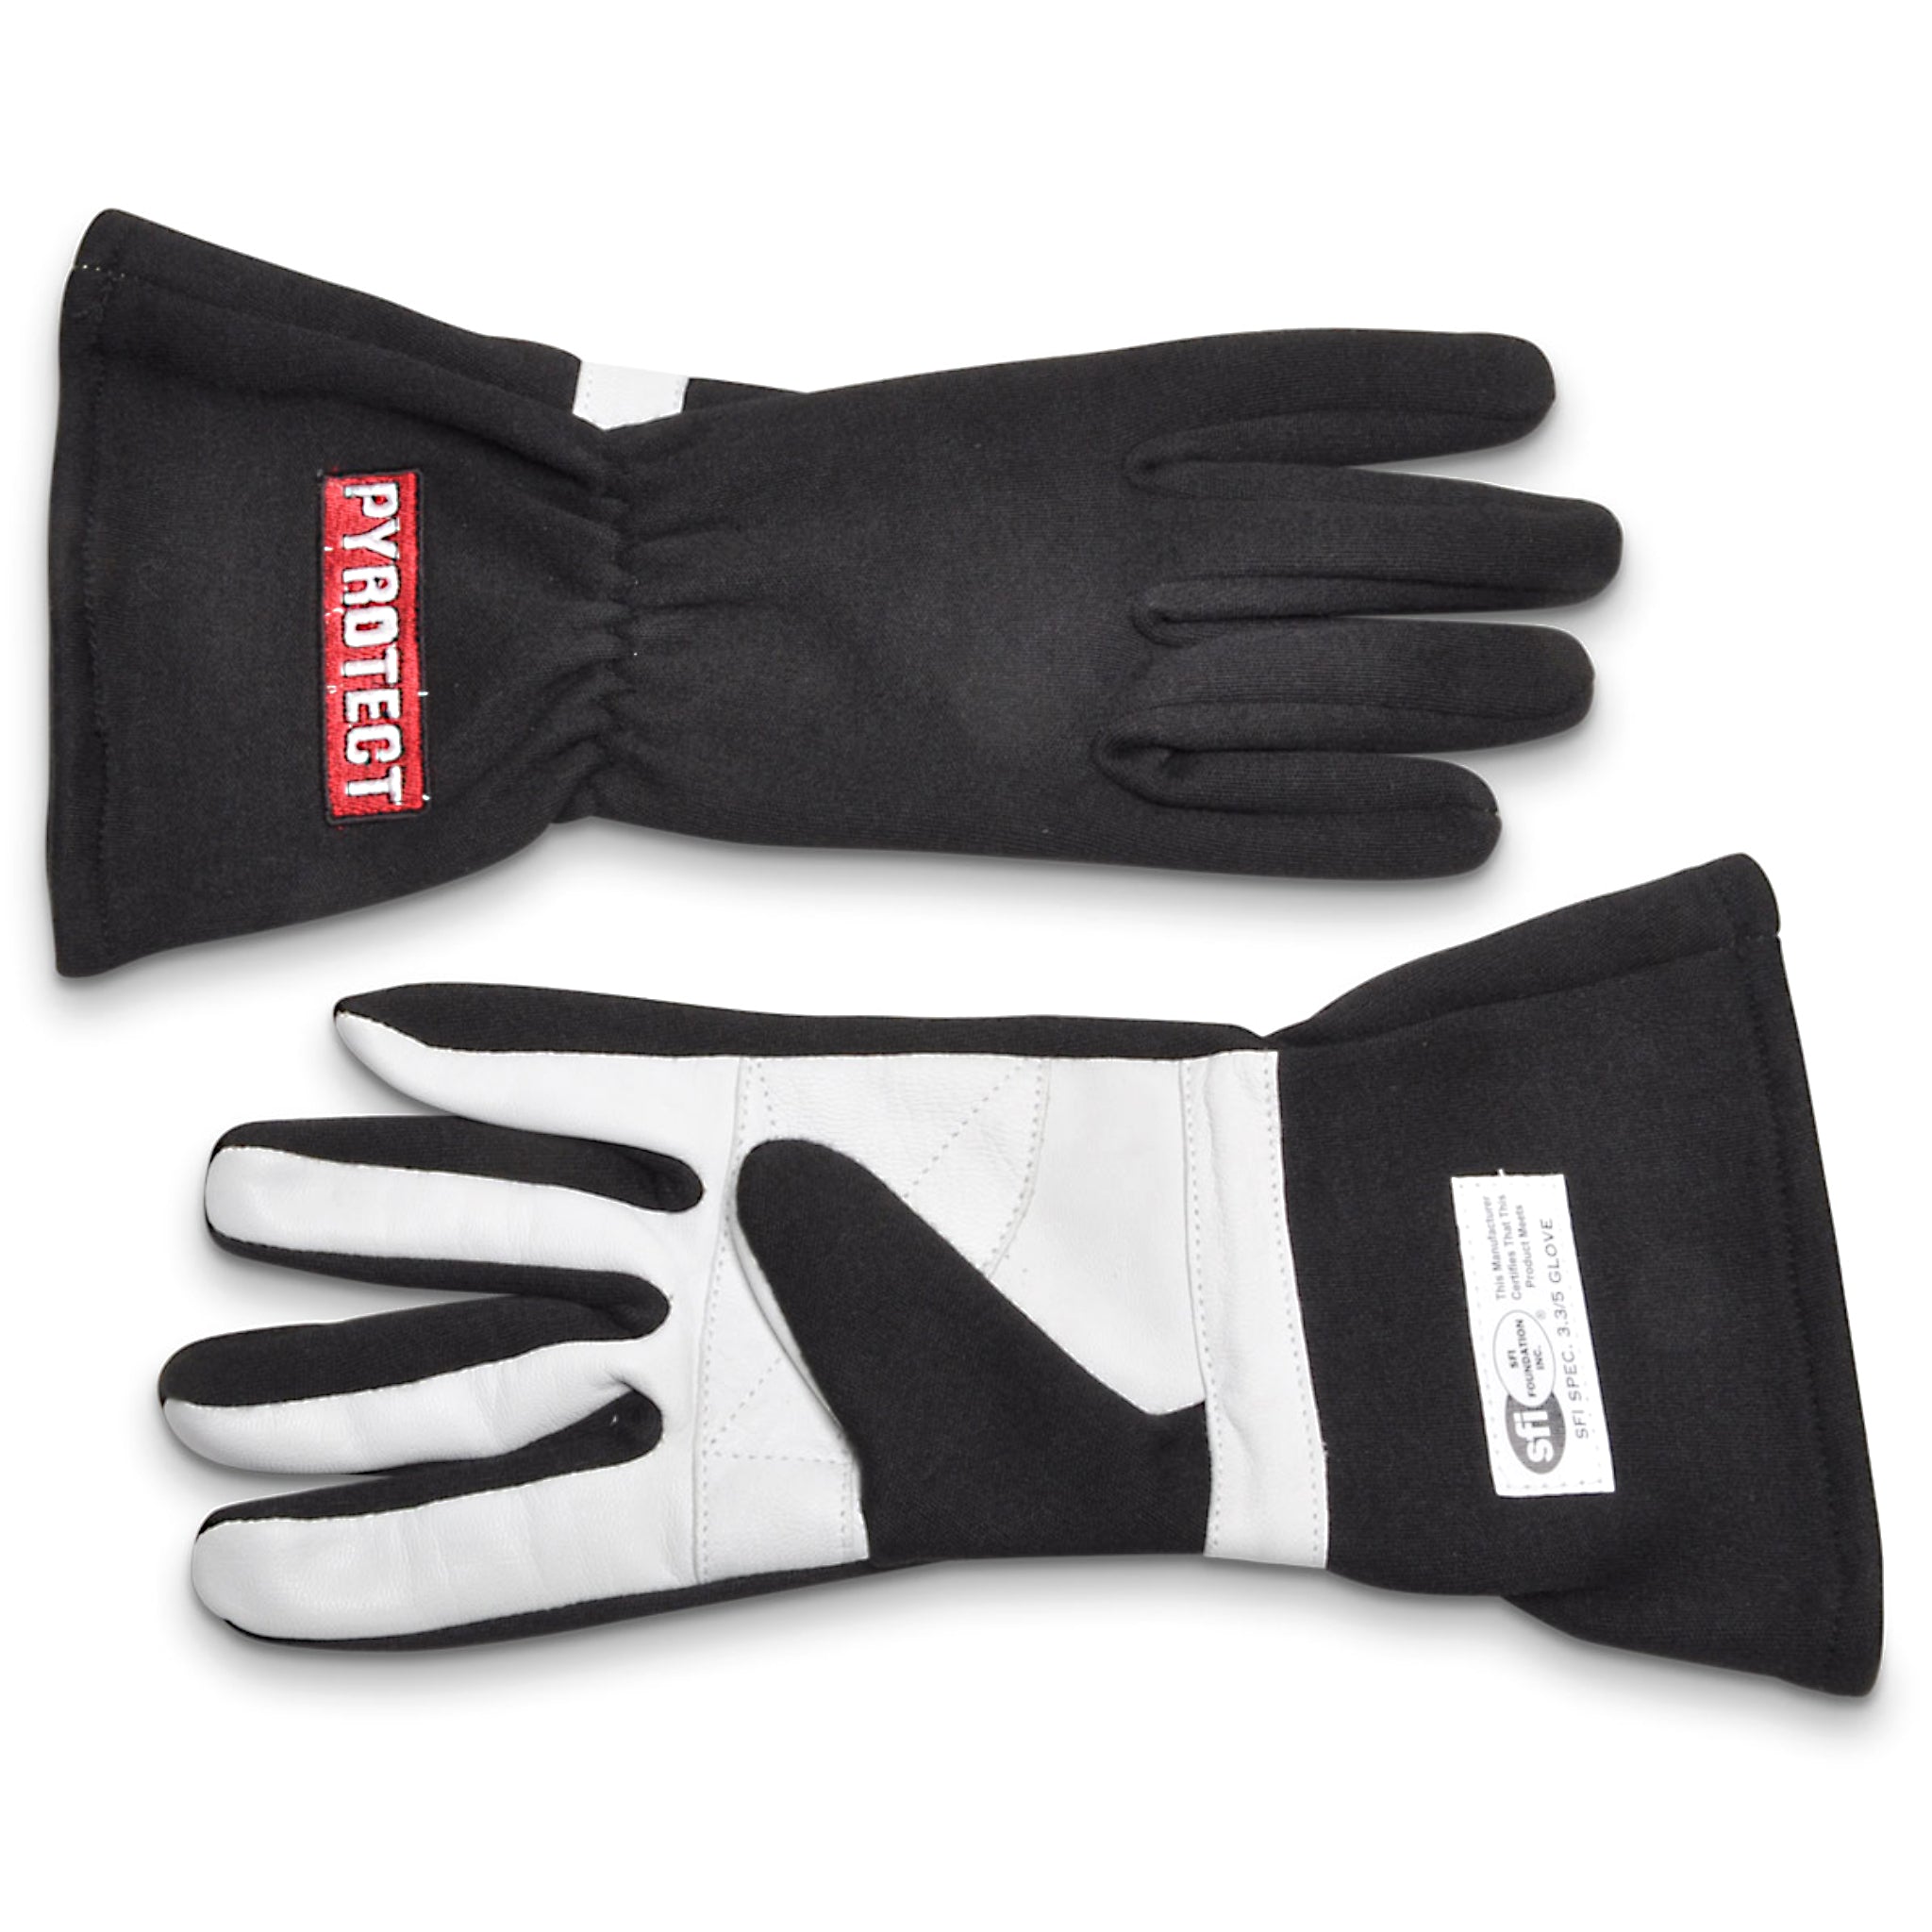 Pyrotect Glove Sport 2 Layer Blk X-Large SFI-5 Safety Clothing Driving Gloves main image